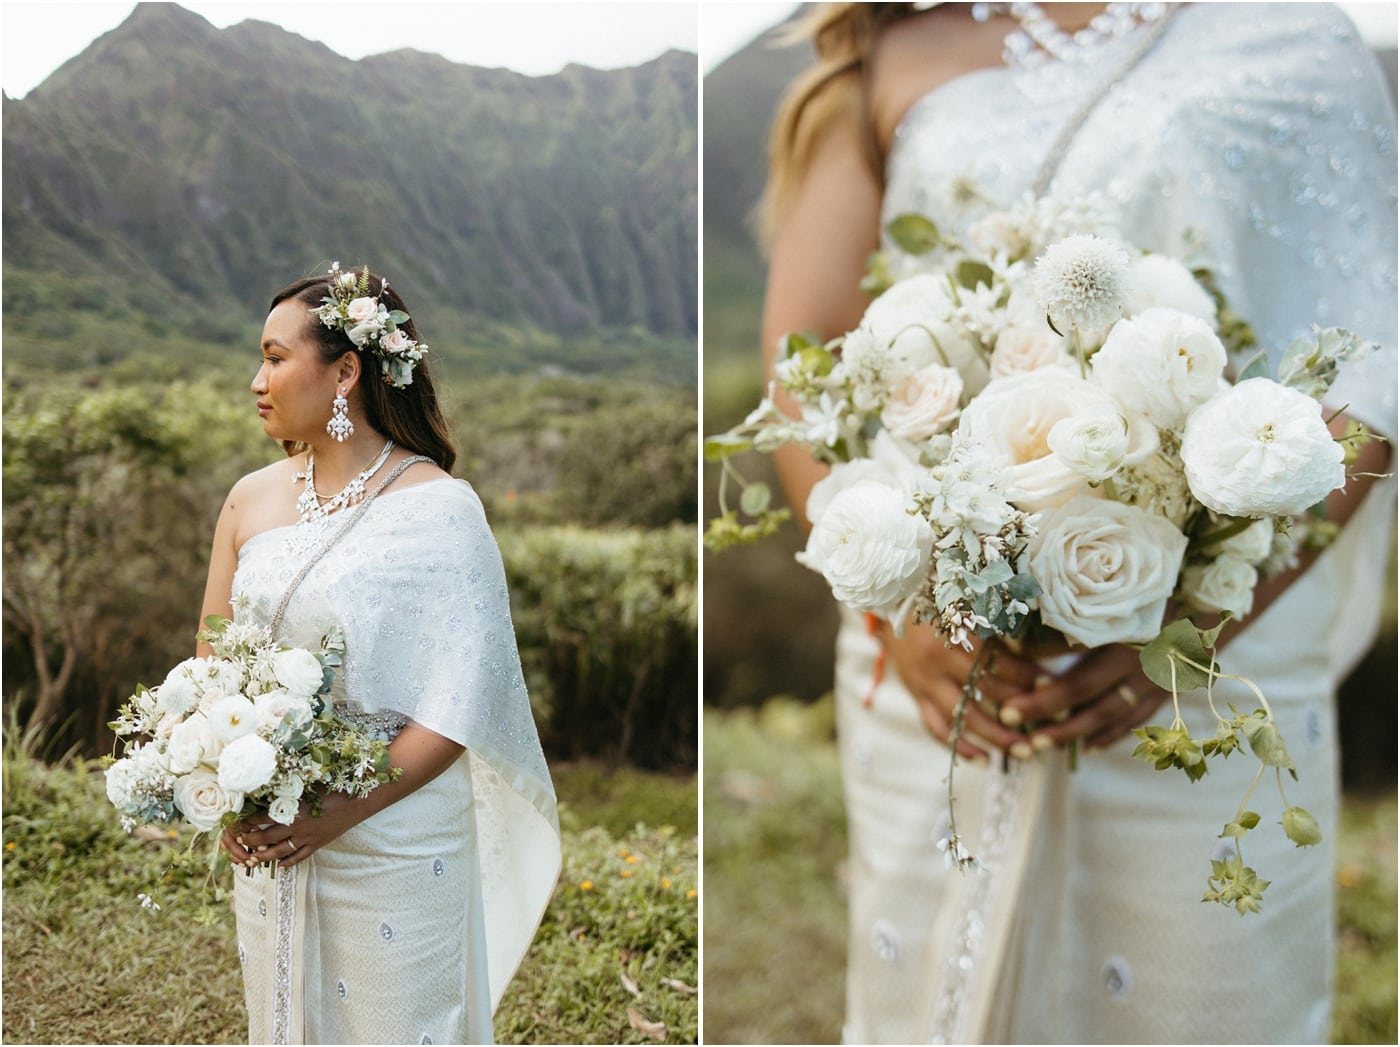 Traditional Cambodian dress for a Hawaii elopement 